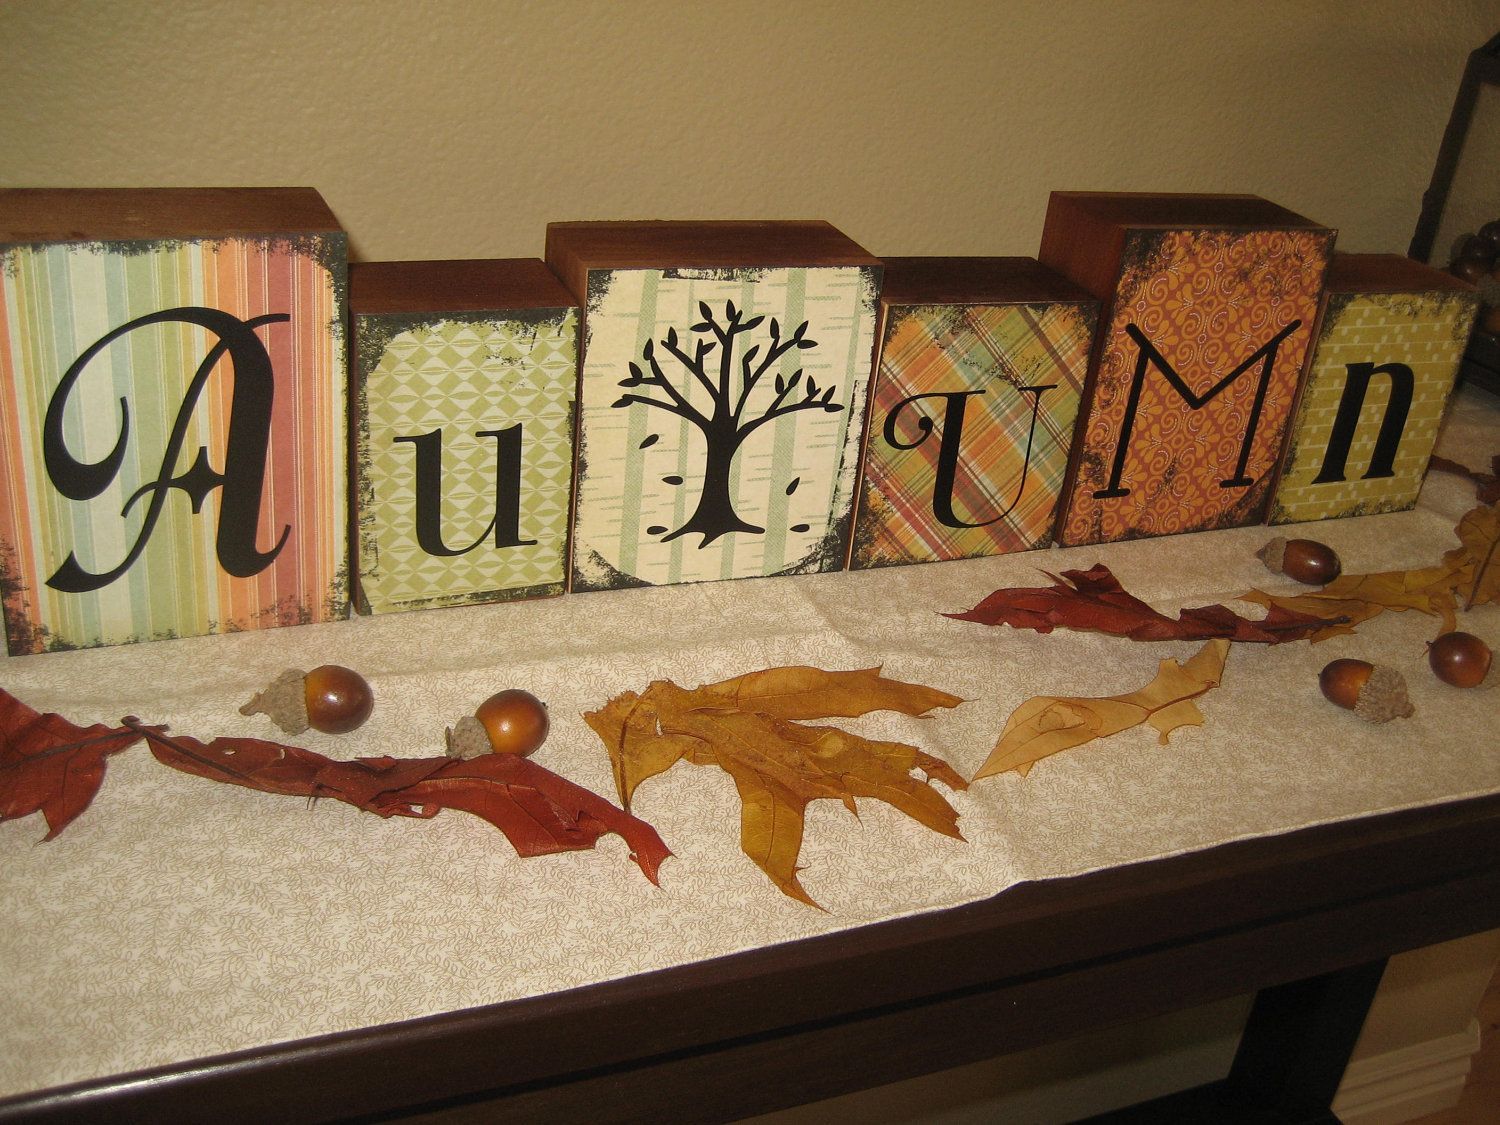 More fun blocks to make, squared blocks, scrapbook paper with vinyl lettering, and black paint